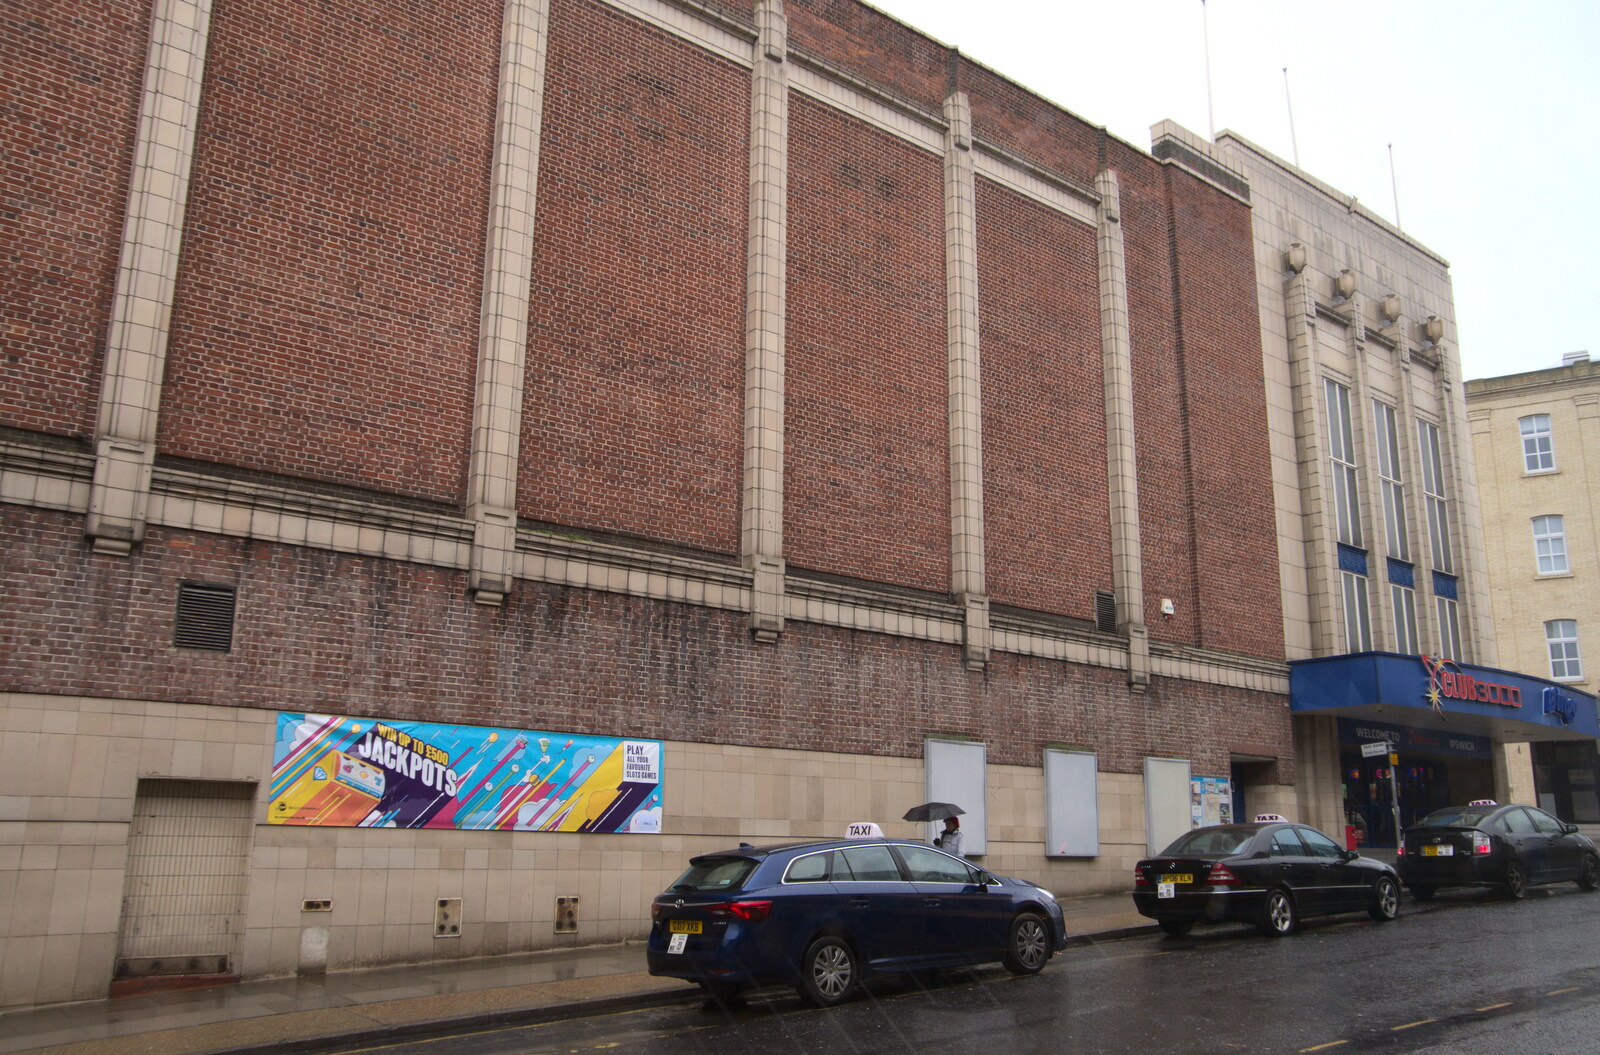 The old Odeon cinema on Lloyds Avenue from Fred's Flute Exam, Ipswich, Suffolk - 5th March 2020